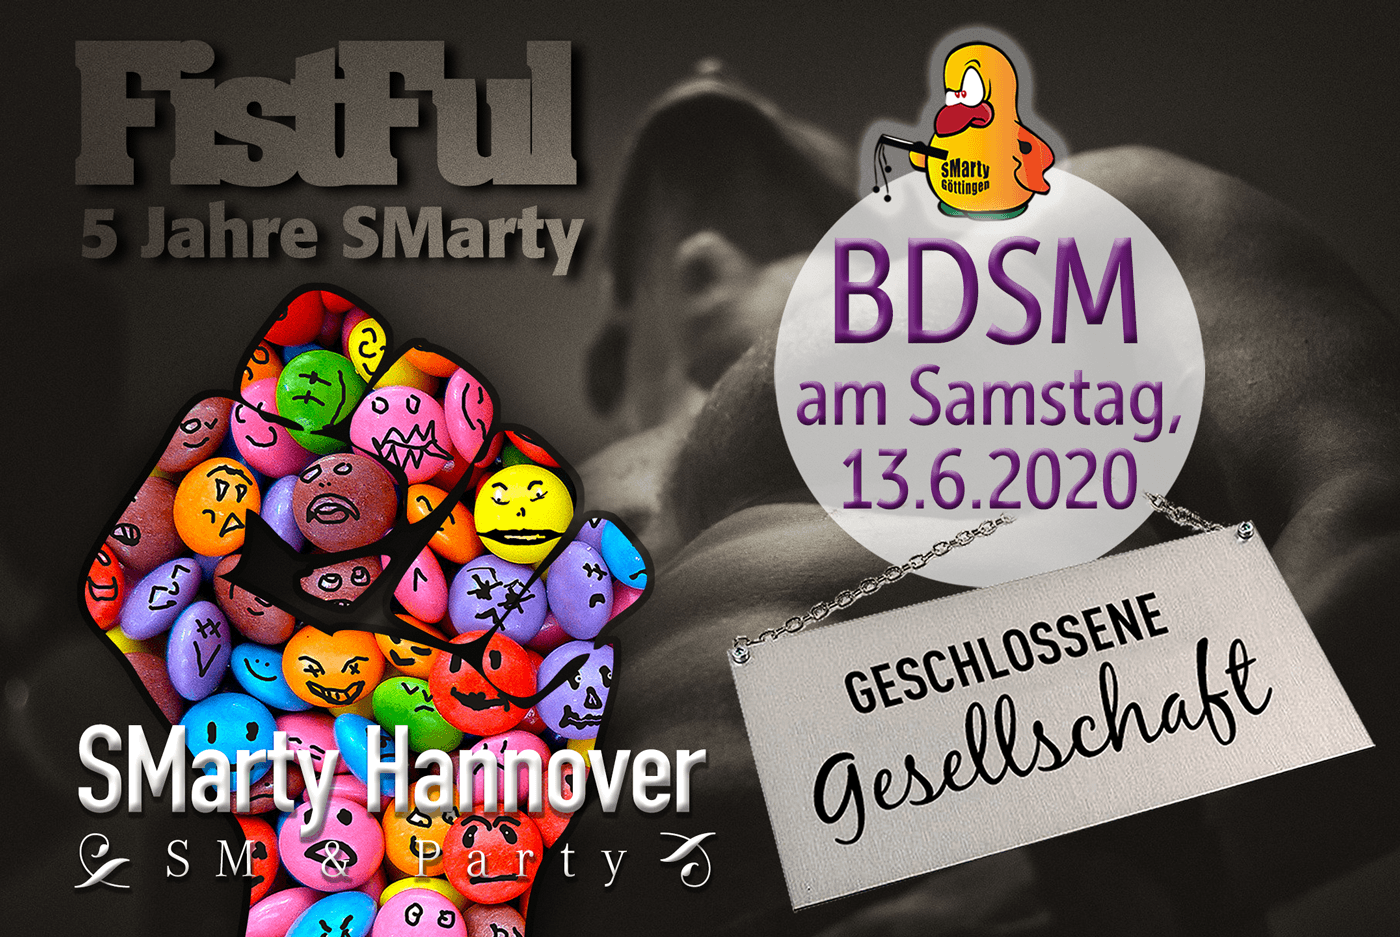 SMarty „Fistful — 5 Jahre SMarty“